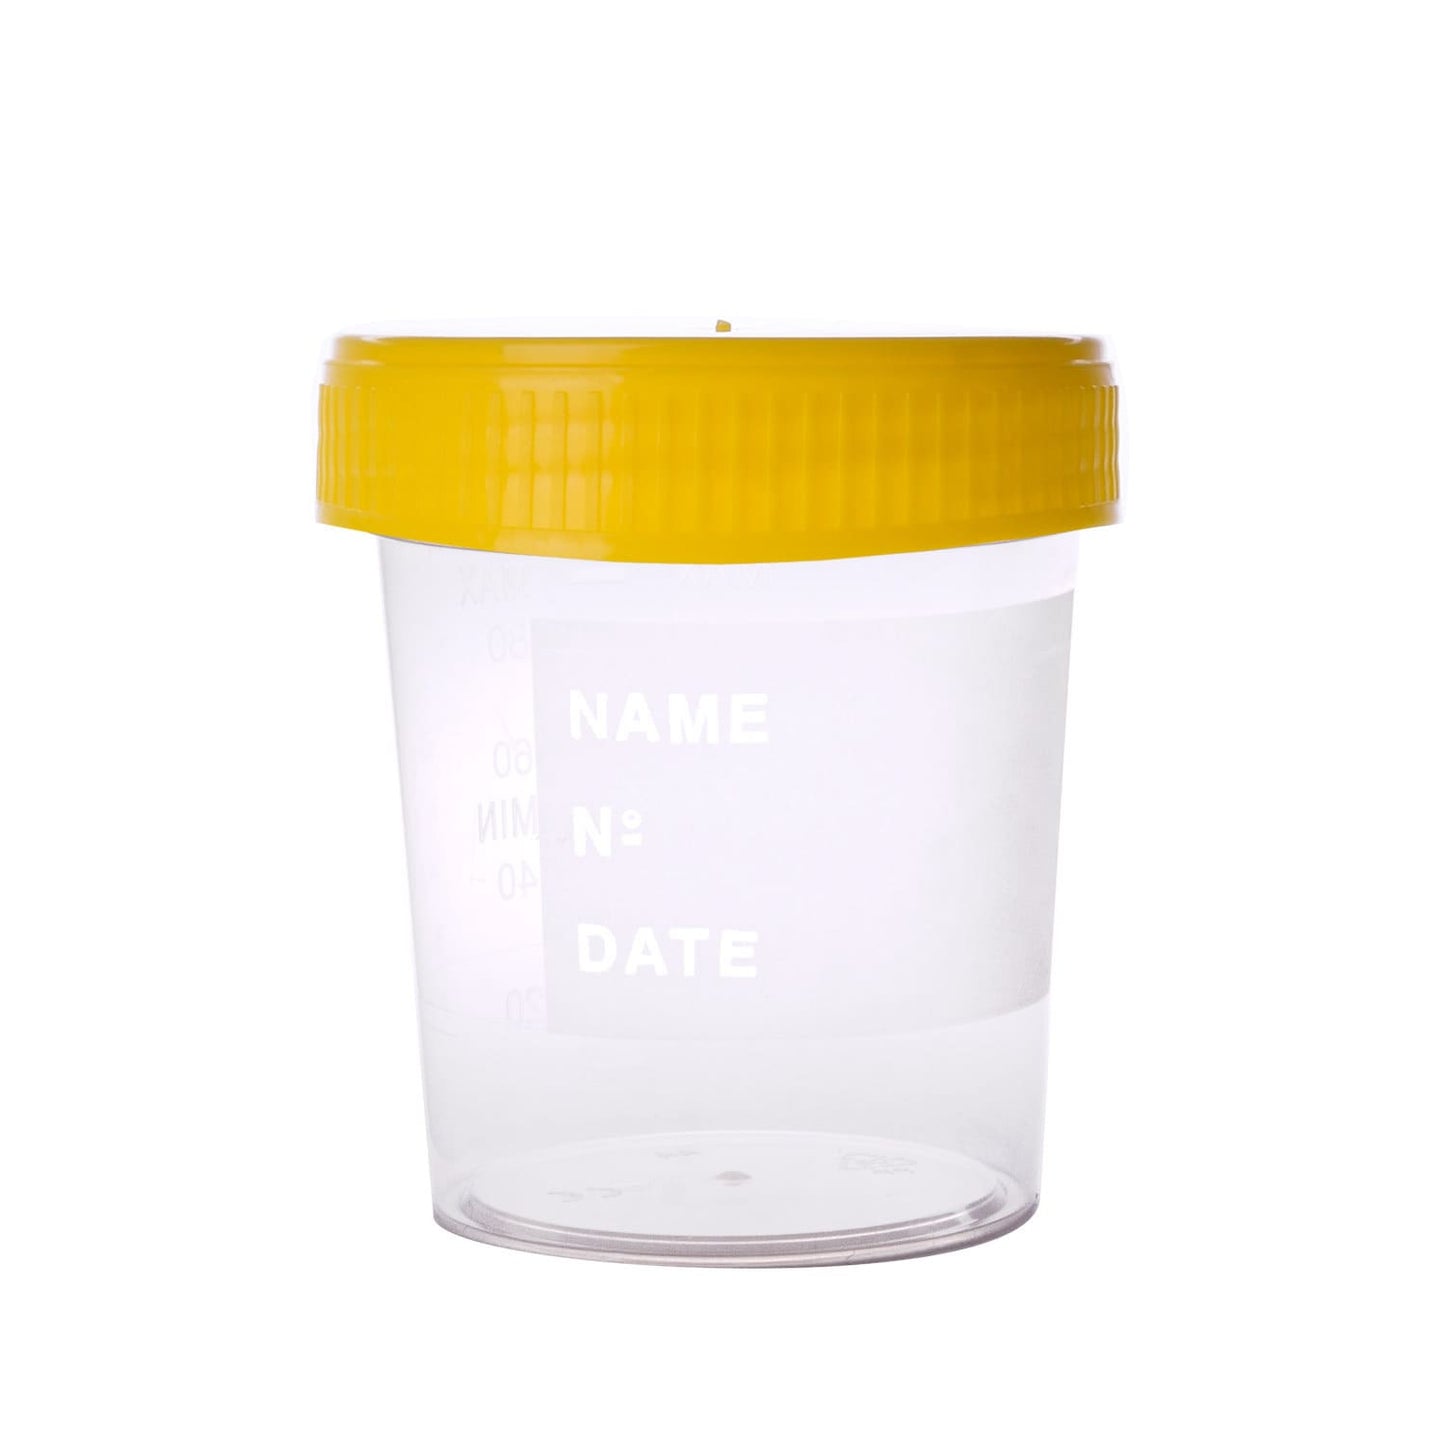 Sterile Urine Cup With Yellow Screw Cap And Scale Up To 120 Ml